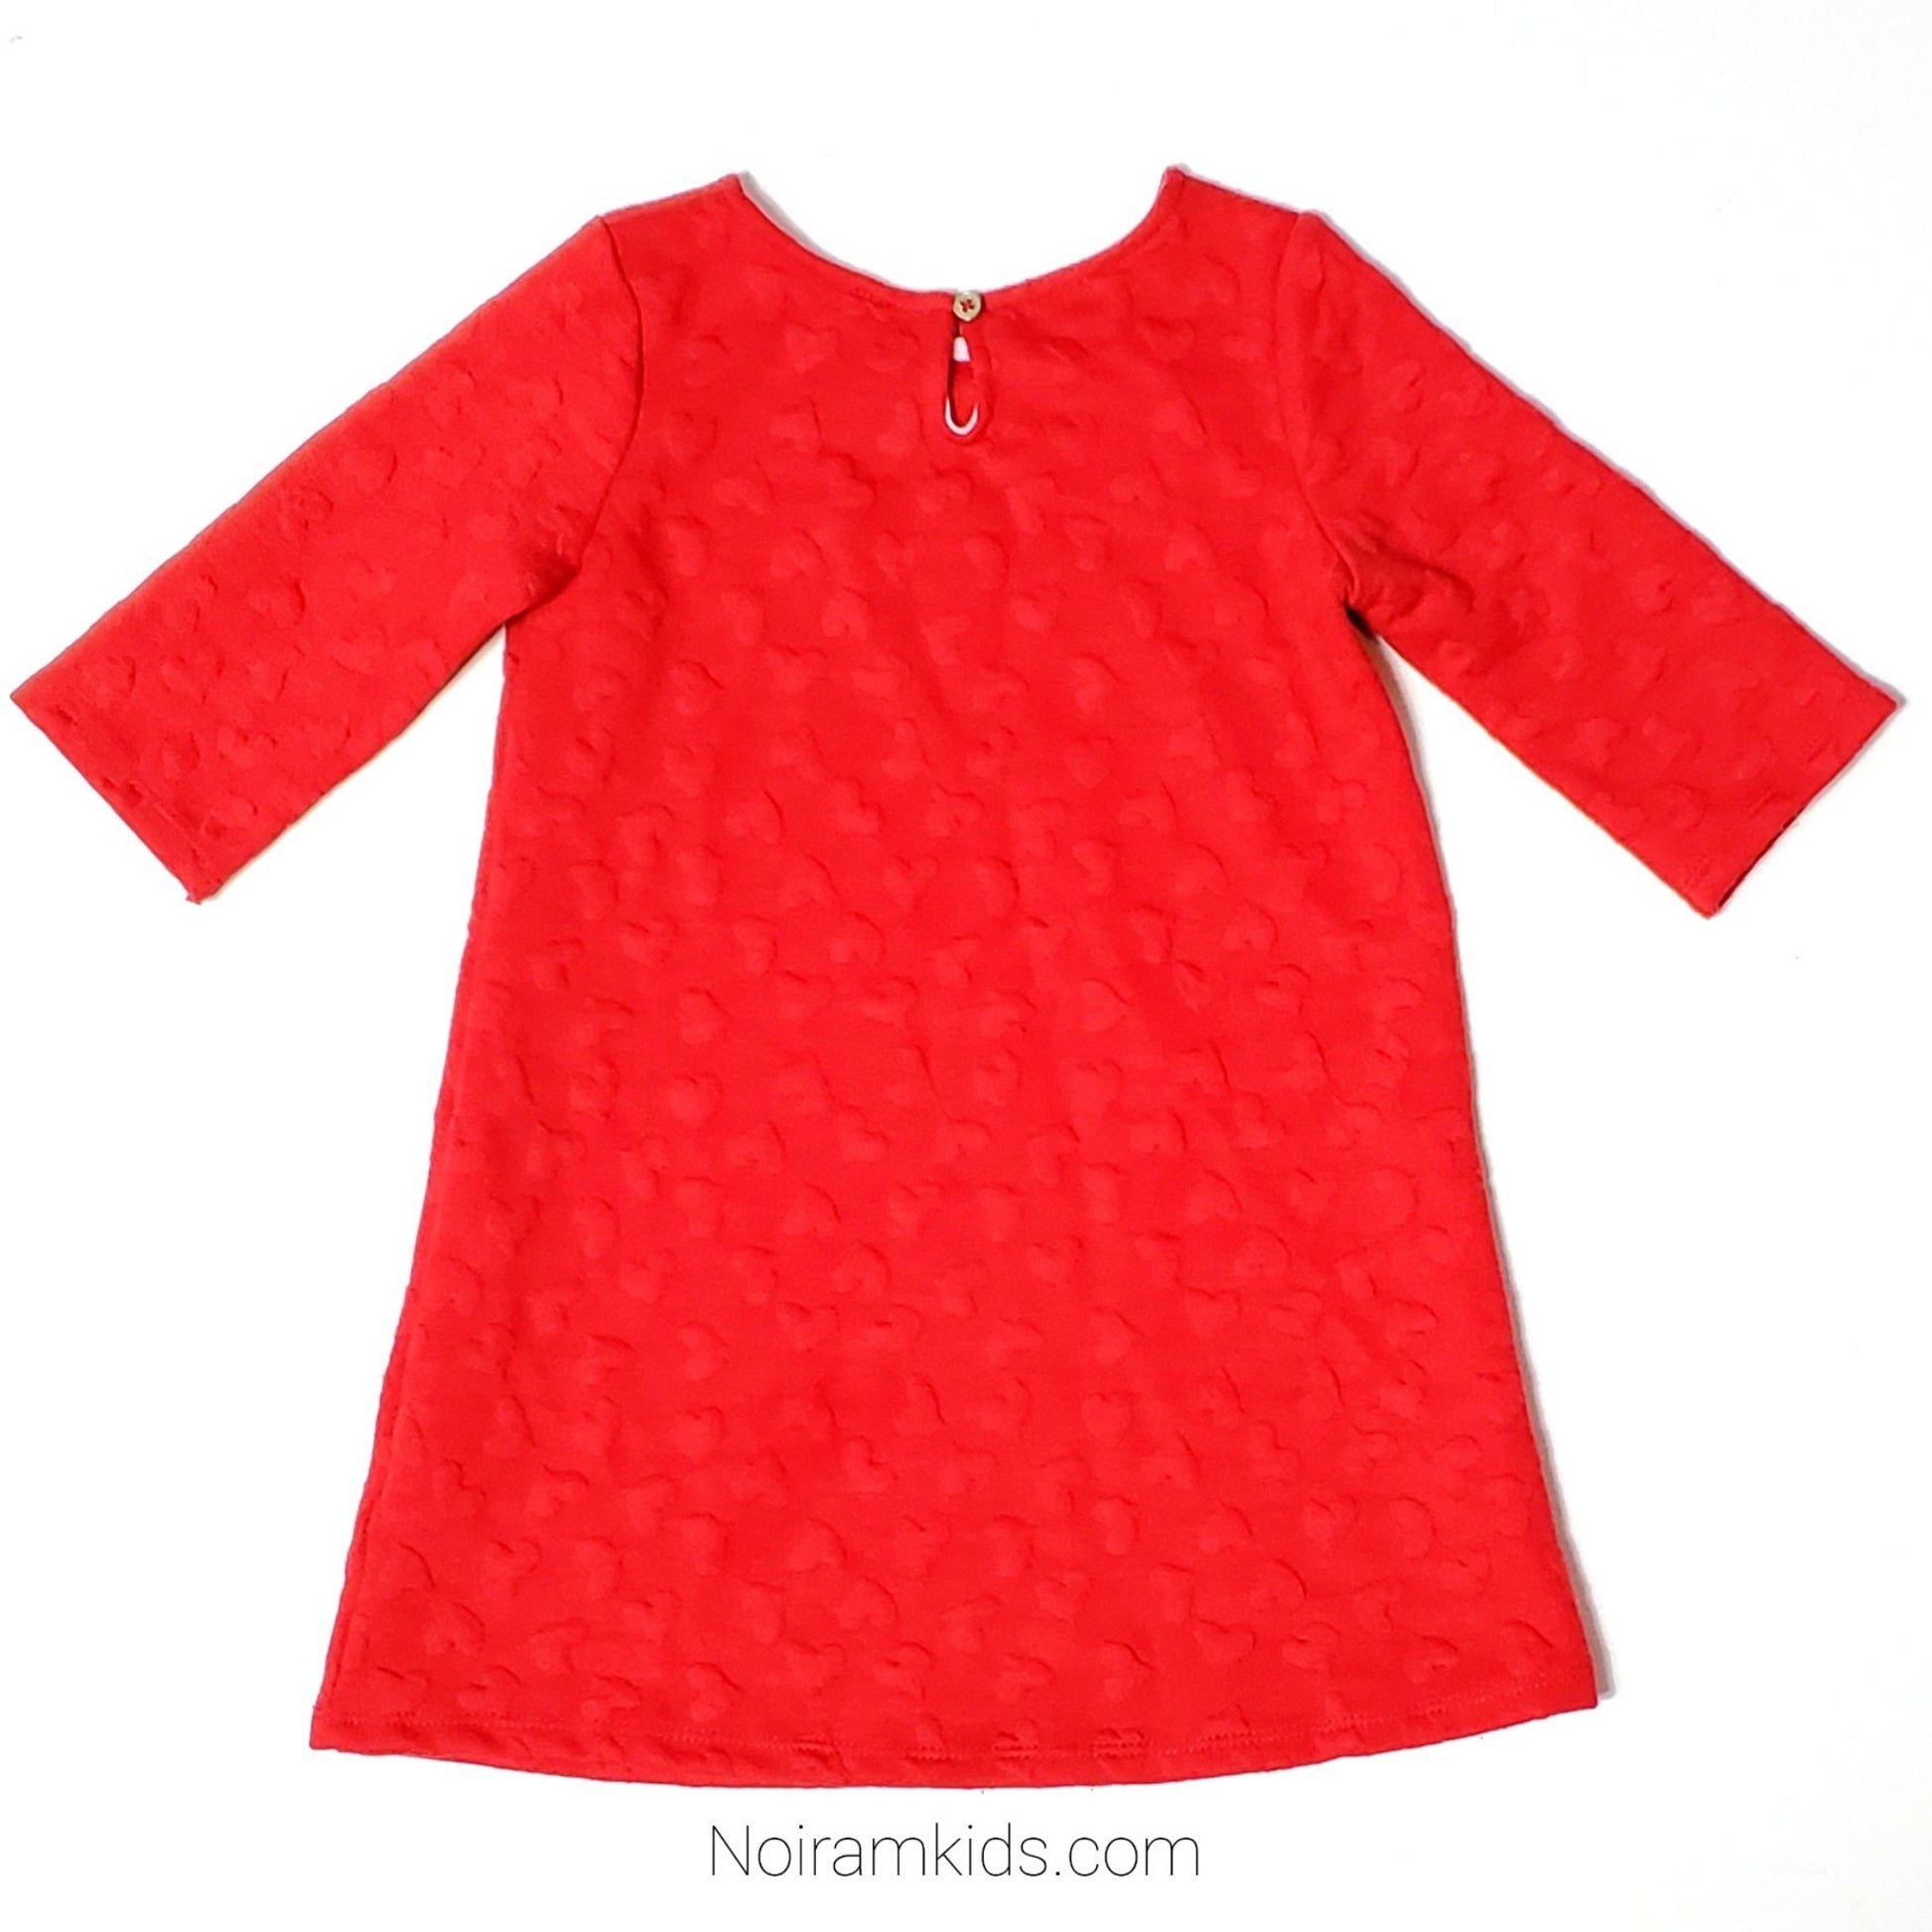 Cat Jack Red Heart Print Girls Dress 3T Used View 2